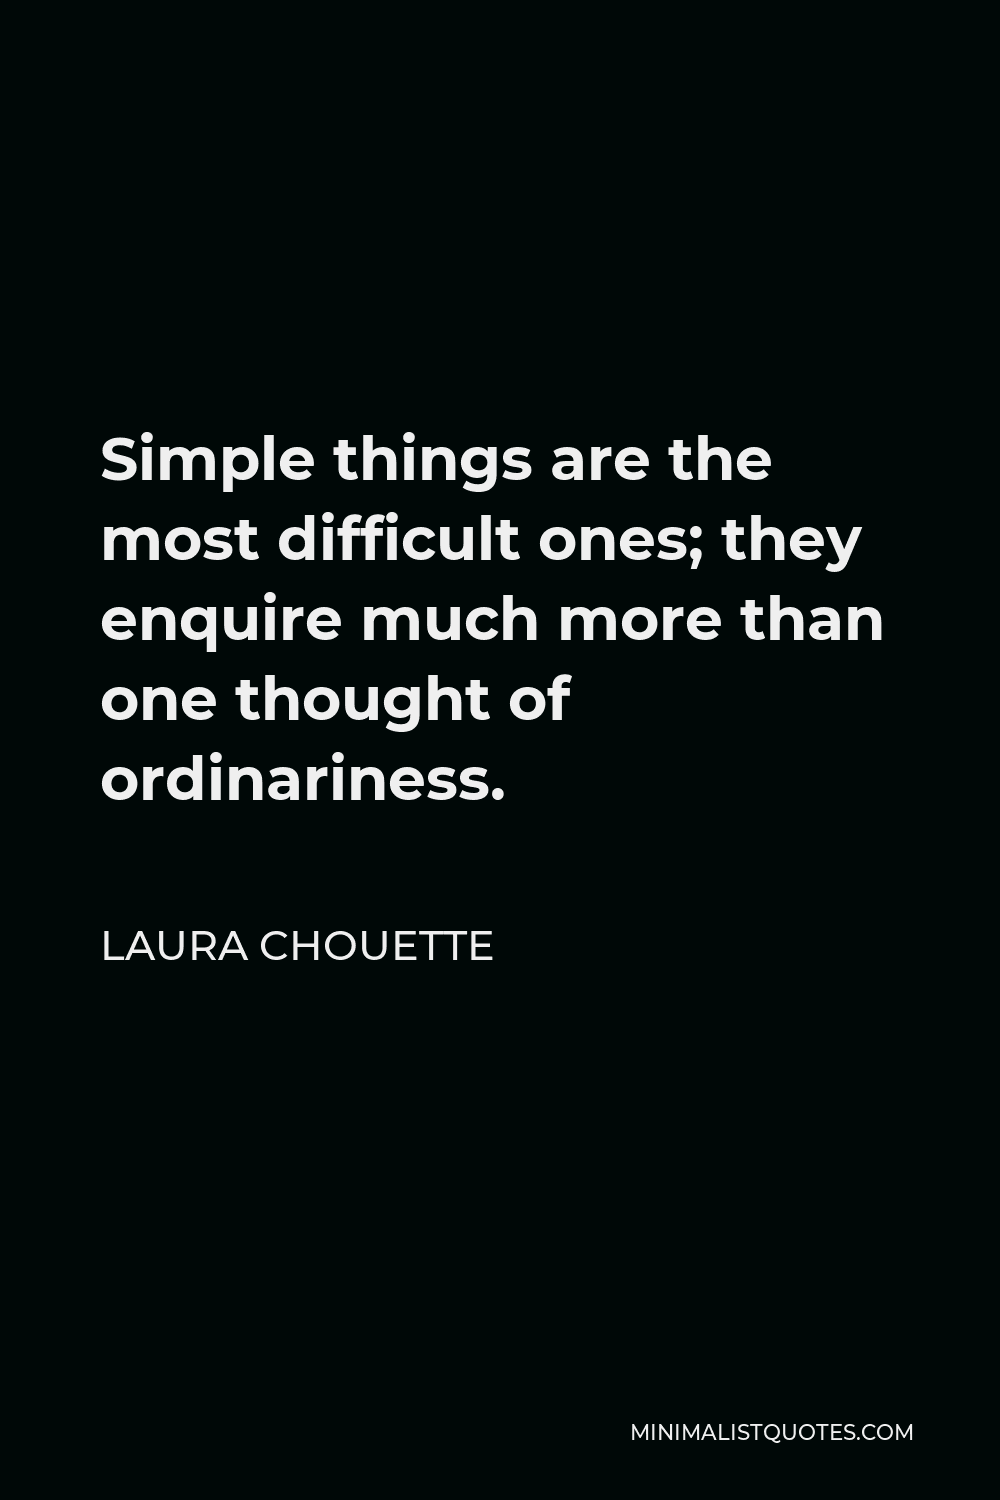 Laura Chouette Quote - Simple things are the most difficult ones; they enquire much more than one thought of ordinariness.